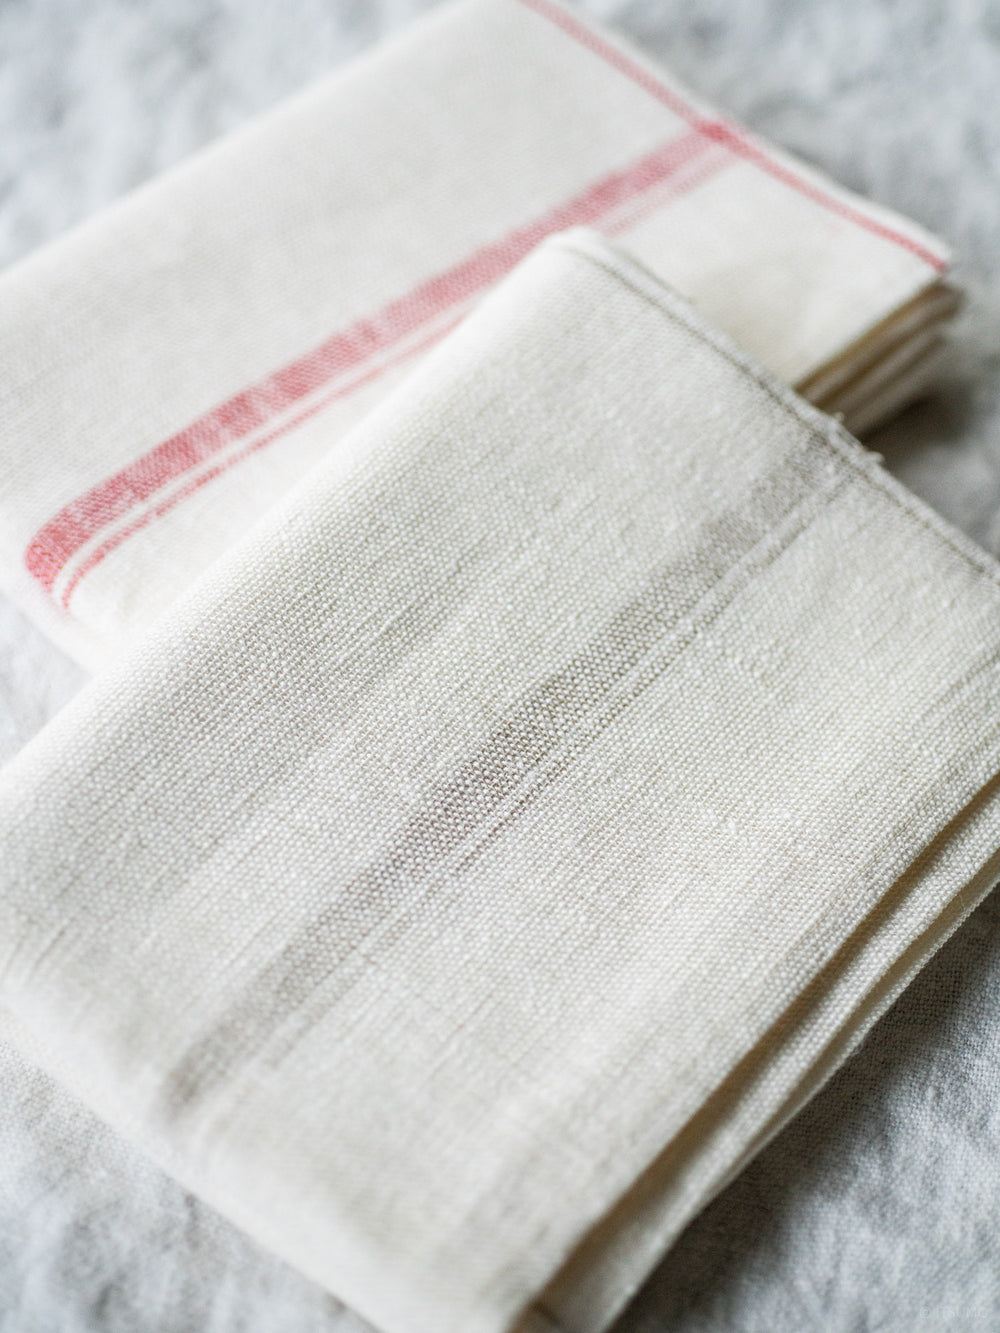 Two azabu linen kitchen towels, one with a red stripe and one with a beige stripe